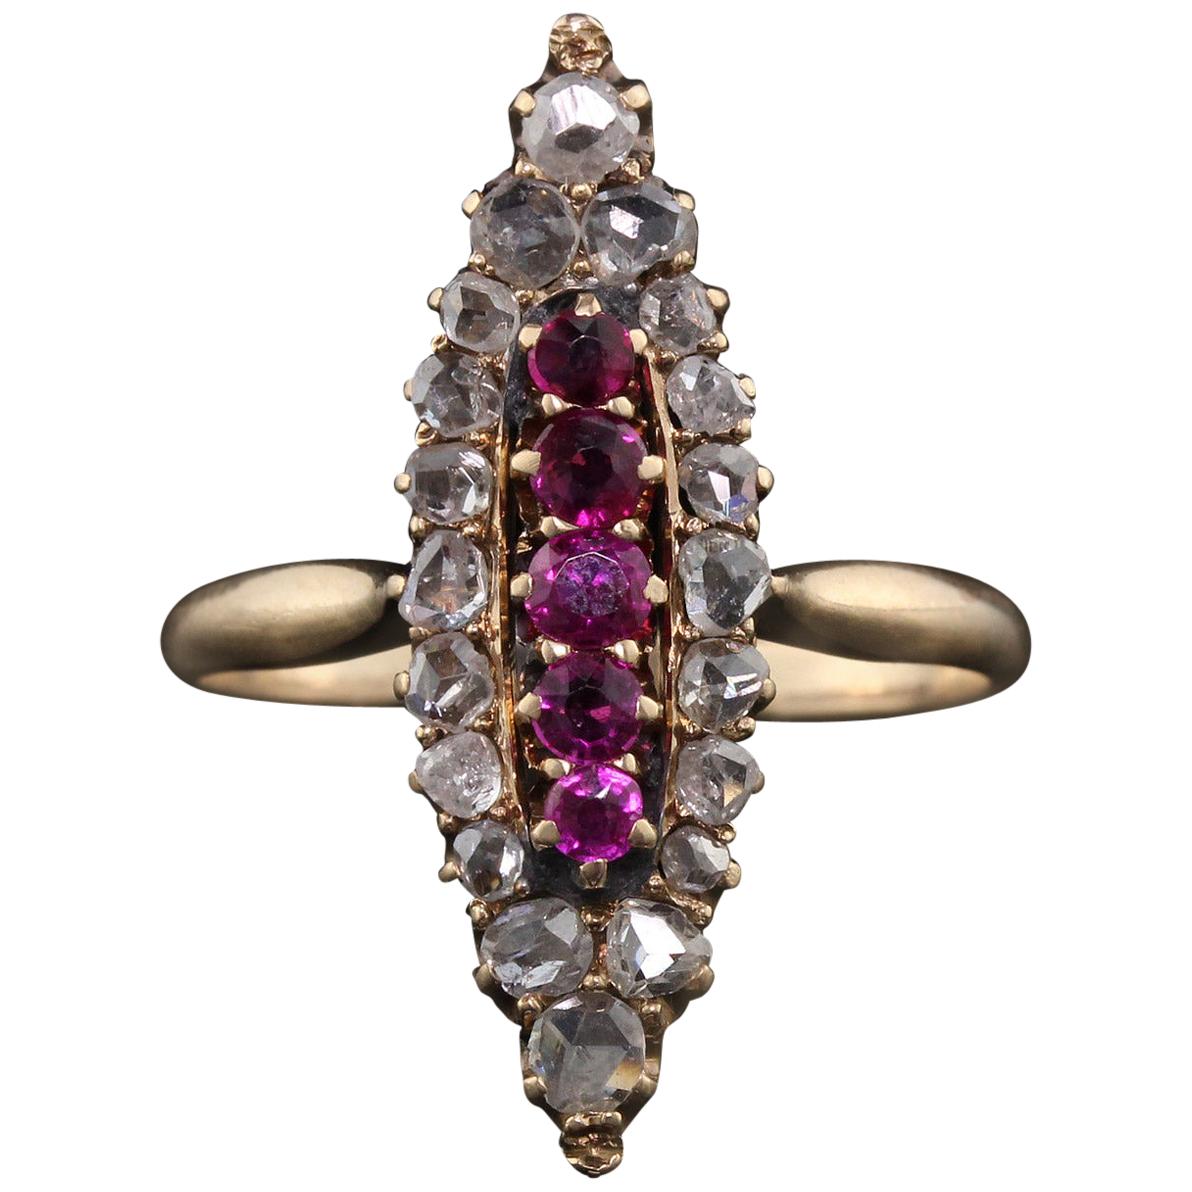 Antique Victorian 14 Karat Yellow Gold, Rose Cut Diamond and Ruby Navette Ring